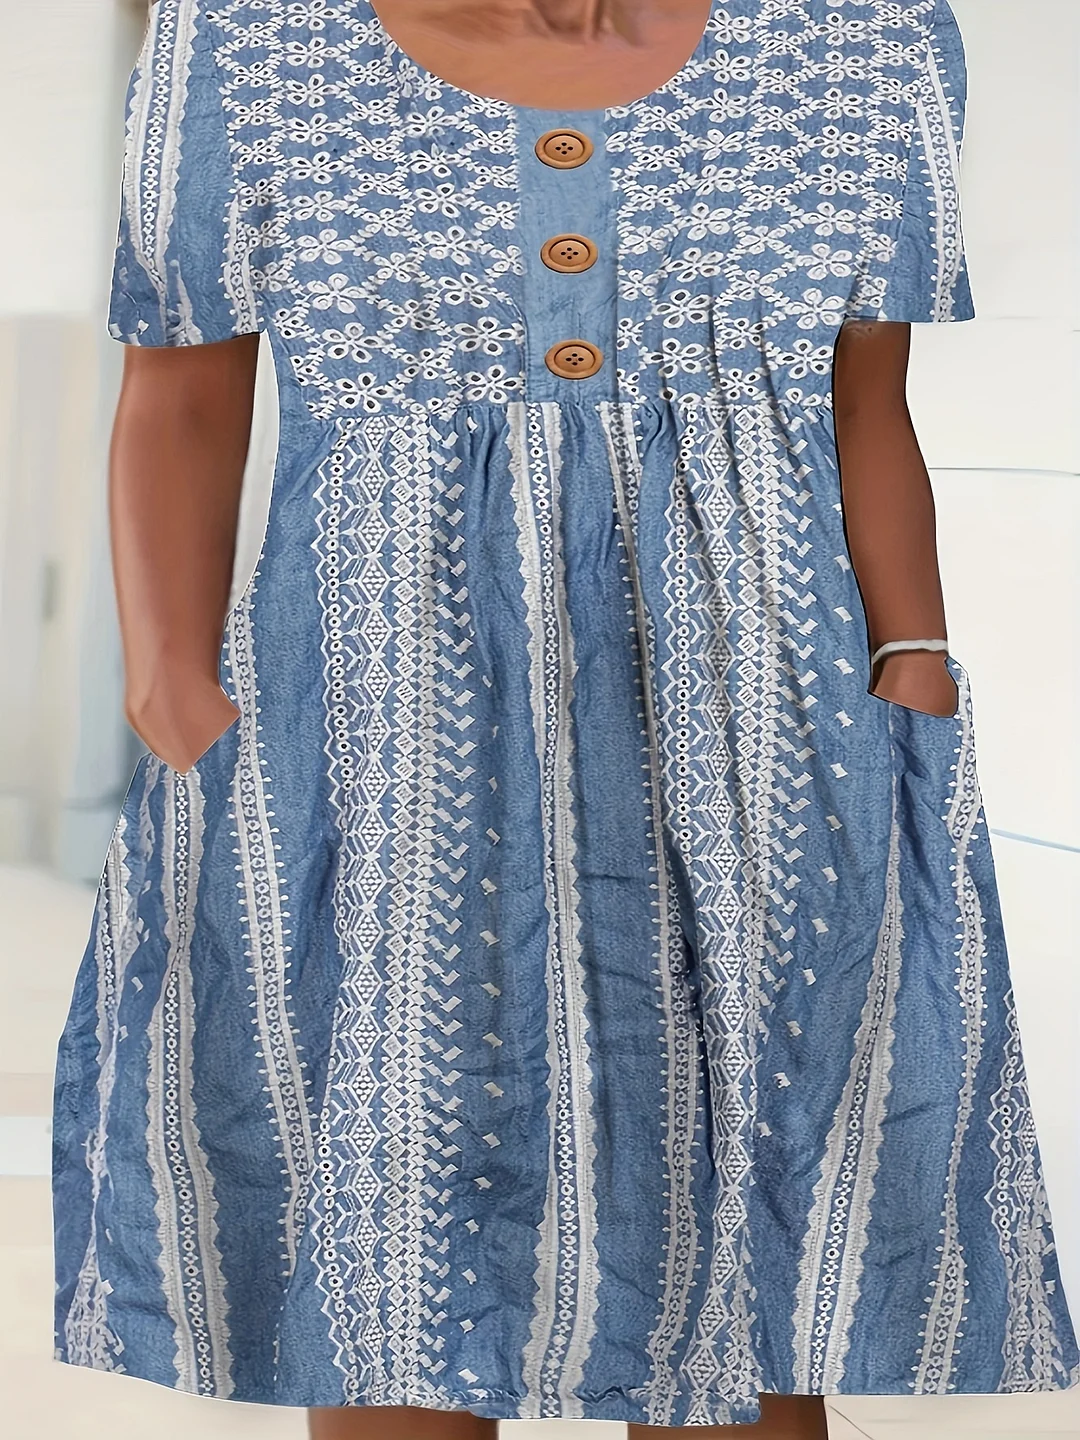 Style & Comfort for Mature Women Plus Size Boho Chic Dress - Bold Geometric Print, Short Sleeve, Stretchy Comfort - Perfect for Curvy Women with Handy Pockets